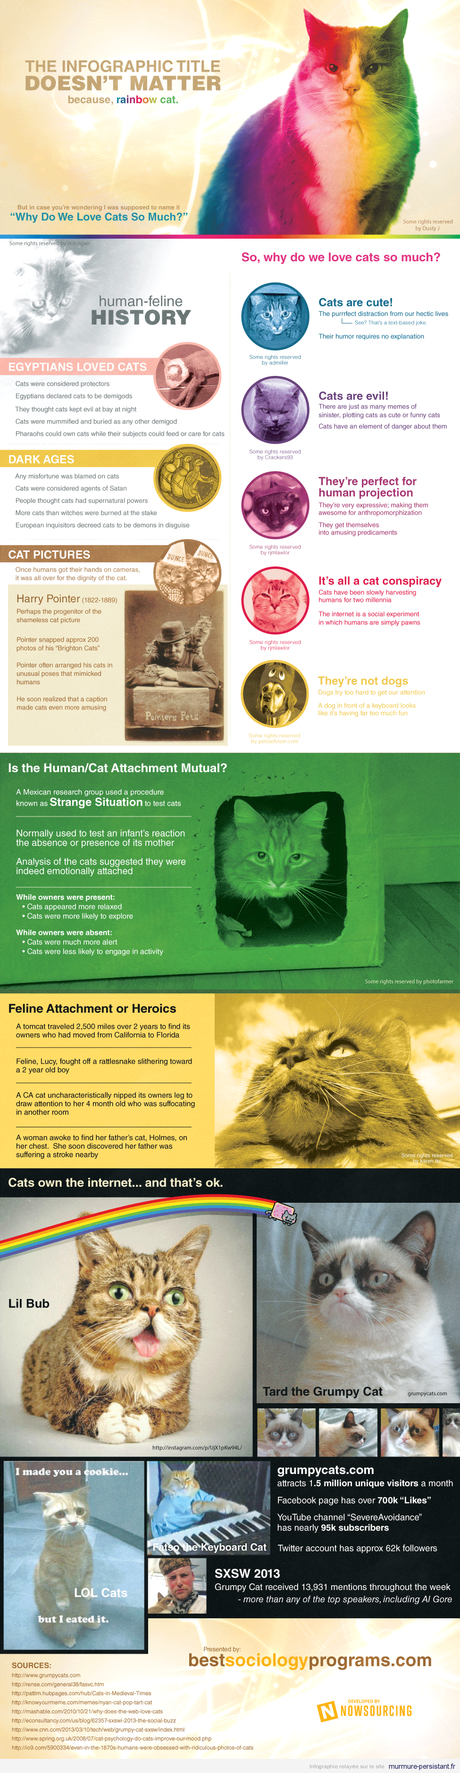 cats-infographic